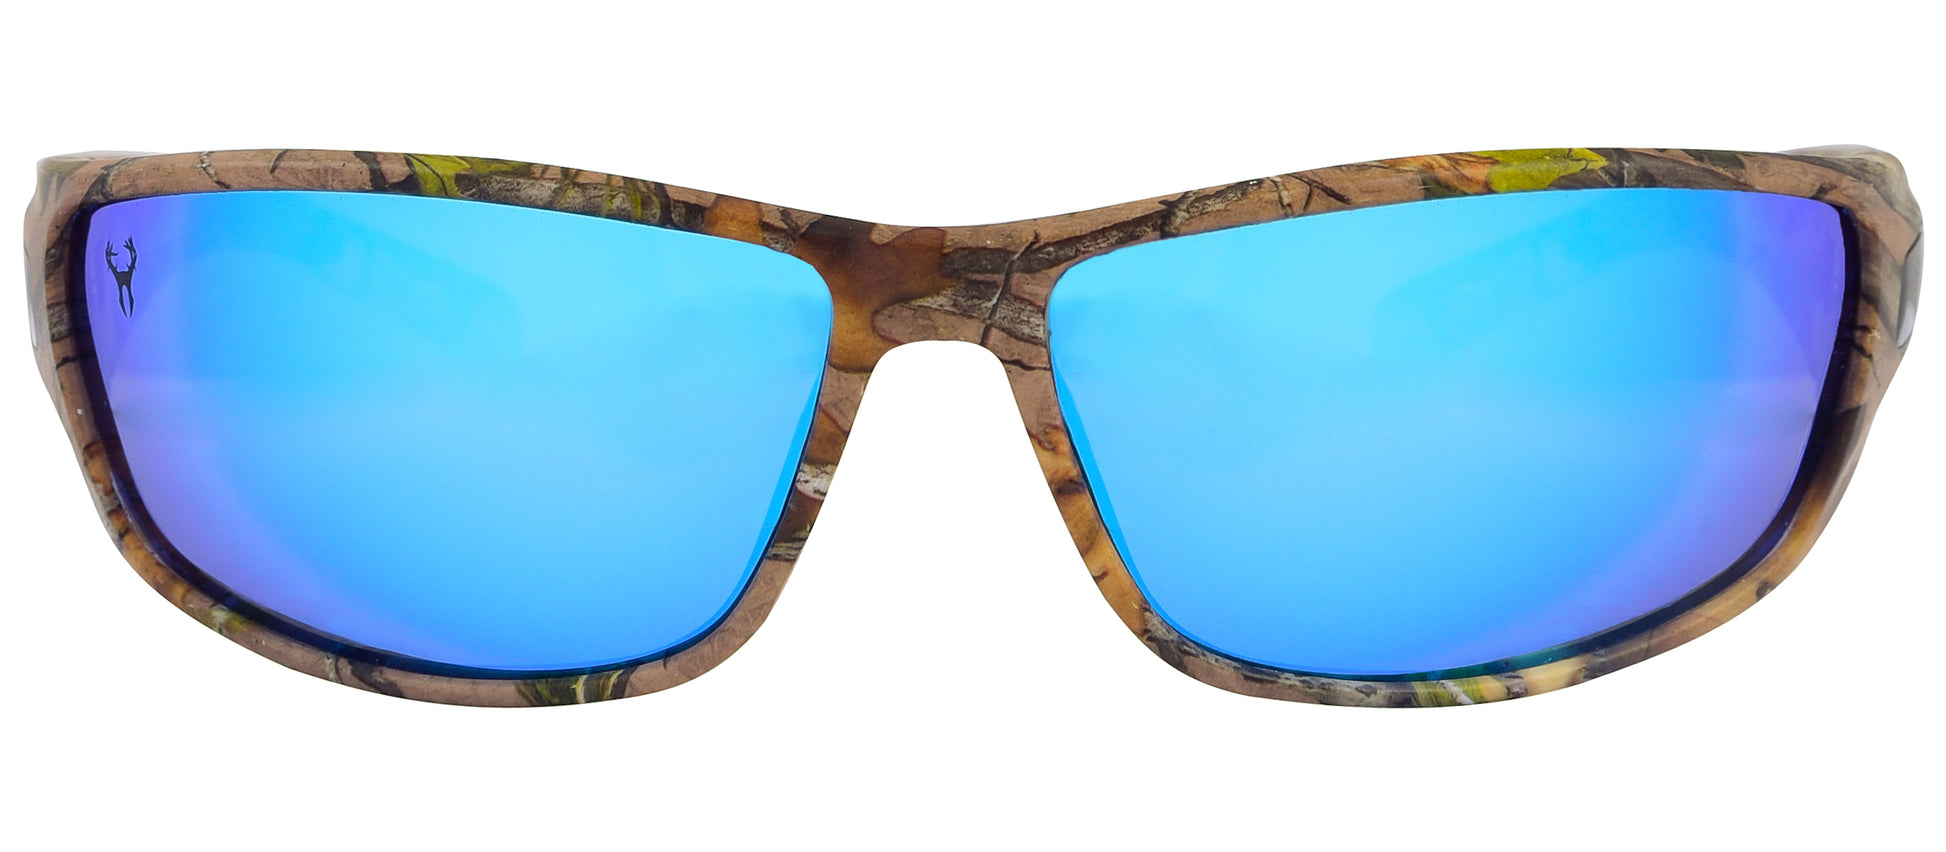 Third image: Hornz Brown Forest Camouflage Polarized Sunglasses for Men - WhiteTail - Free Matching Microfiber Pouch - Brown Camo Frame - Ice Blue Lens